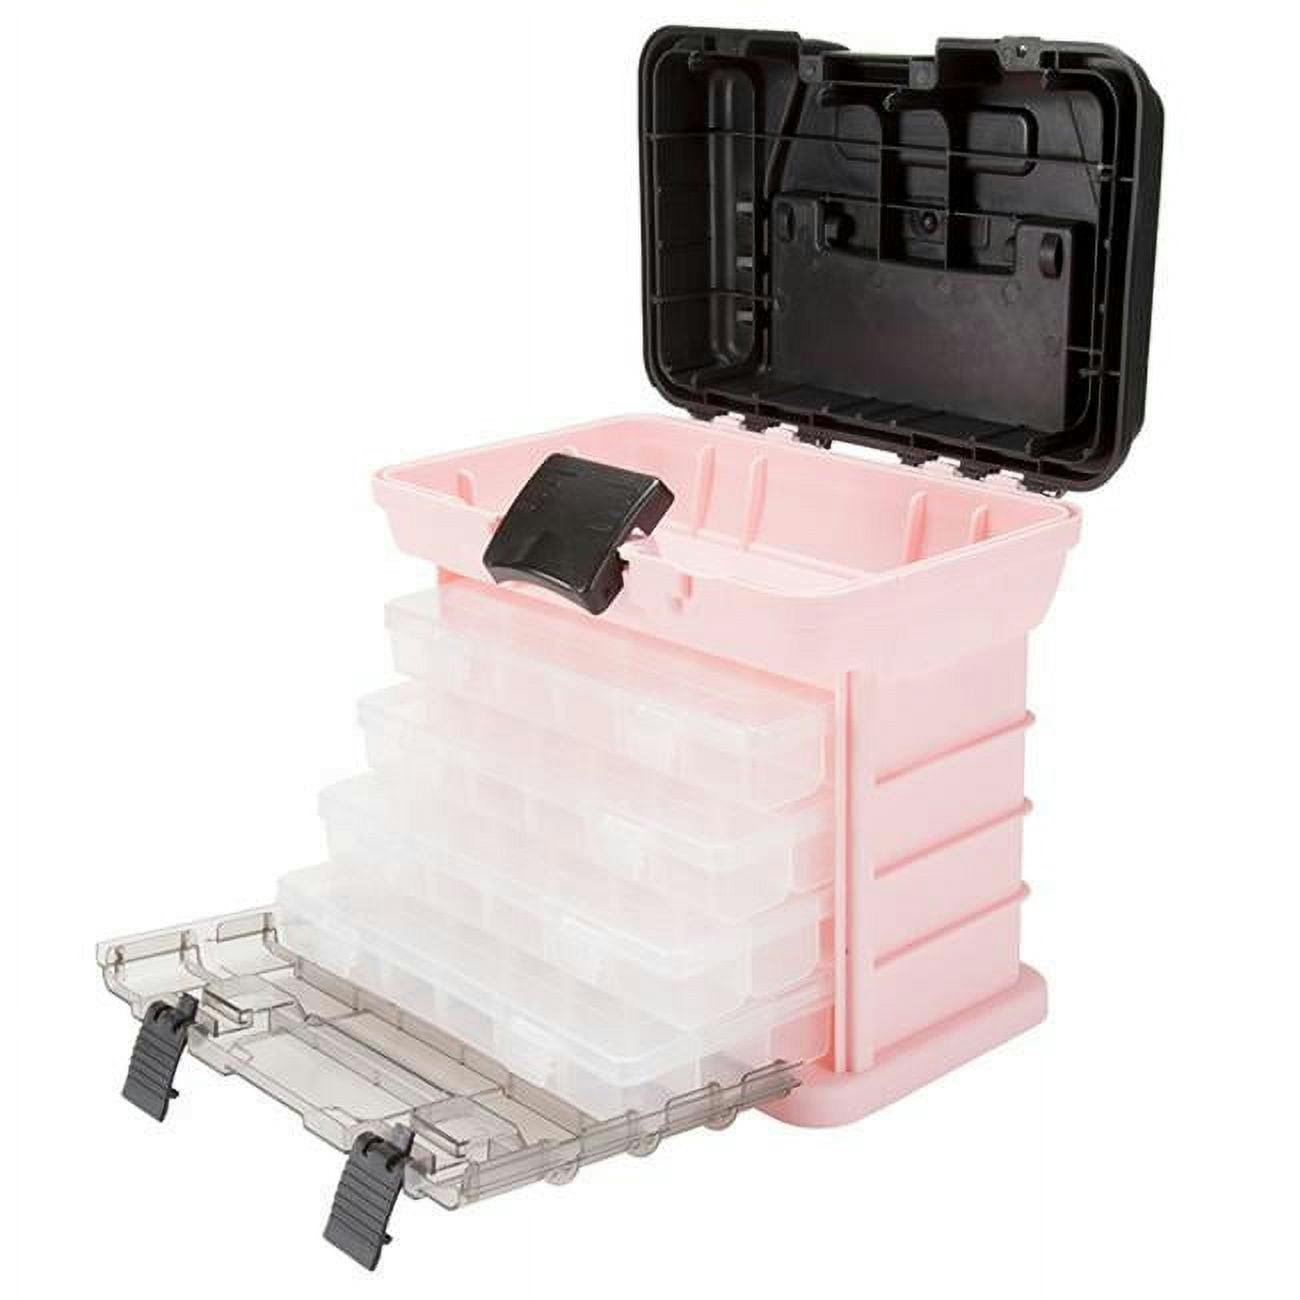 Stalwart Compact Pink Tool Box with 4 Removable Organizers